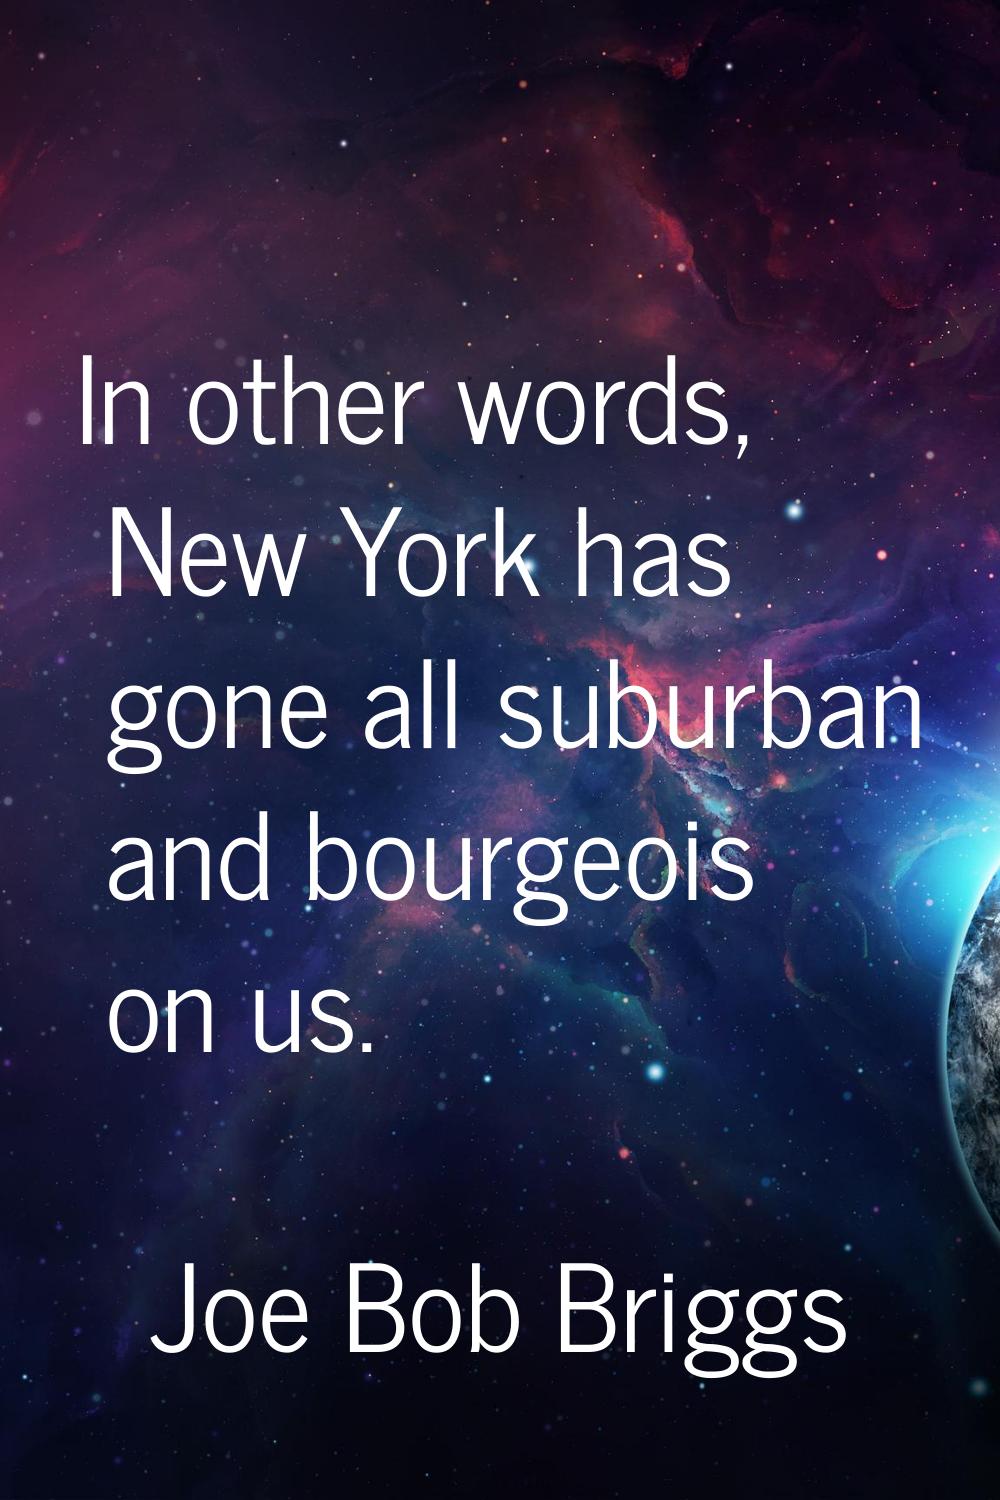 In other words, New York has gone all suburban and bourgeois on us.